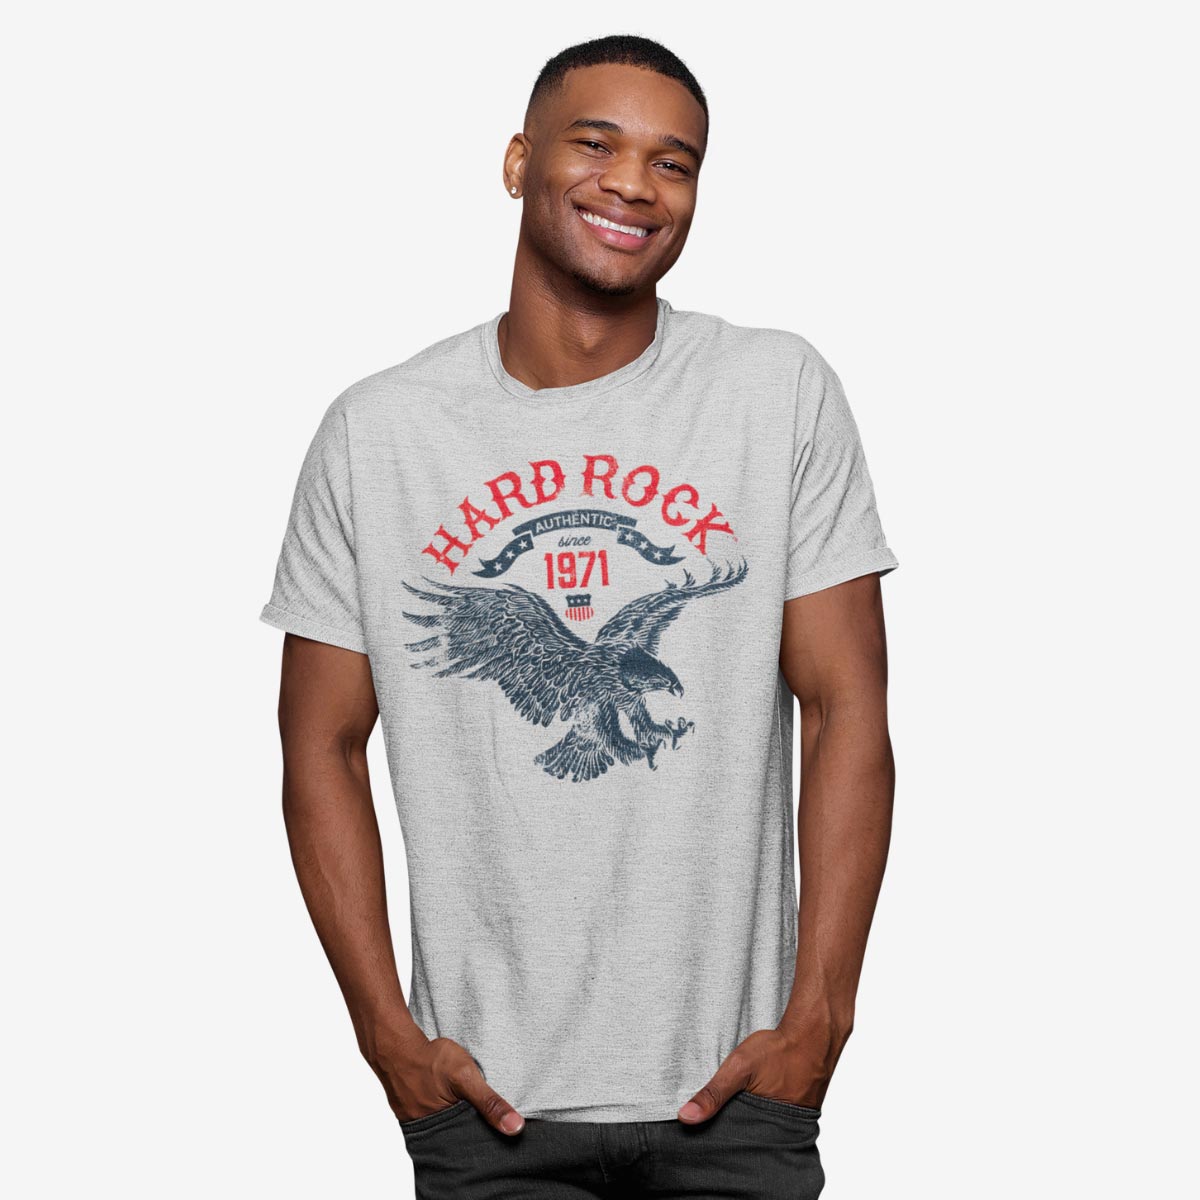 Americana Adult Fit Grey Tee with Flying Eagle Logo Motif image number 1